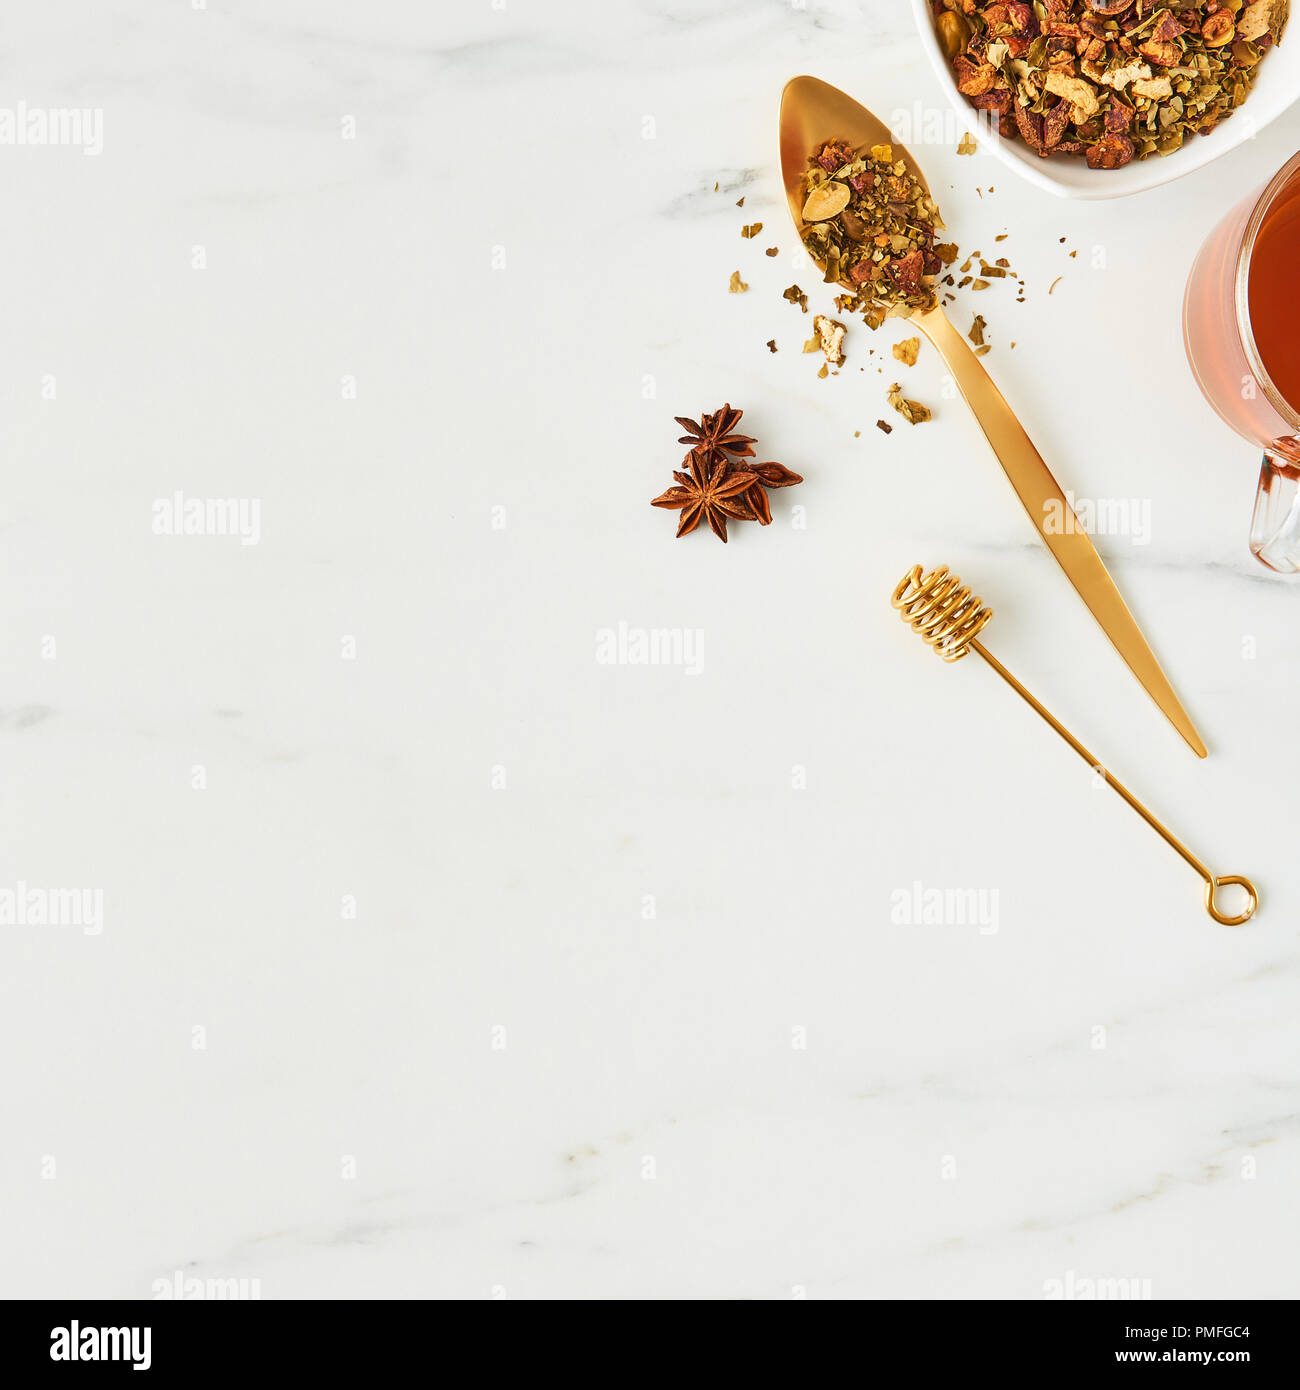 Flat lay of fresh black tea, with golden spoon, dipper and herbs on white marble background. Top view, square crop with copy space. Stock Photo